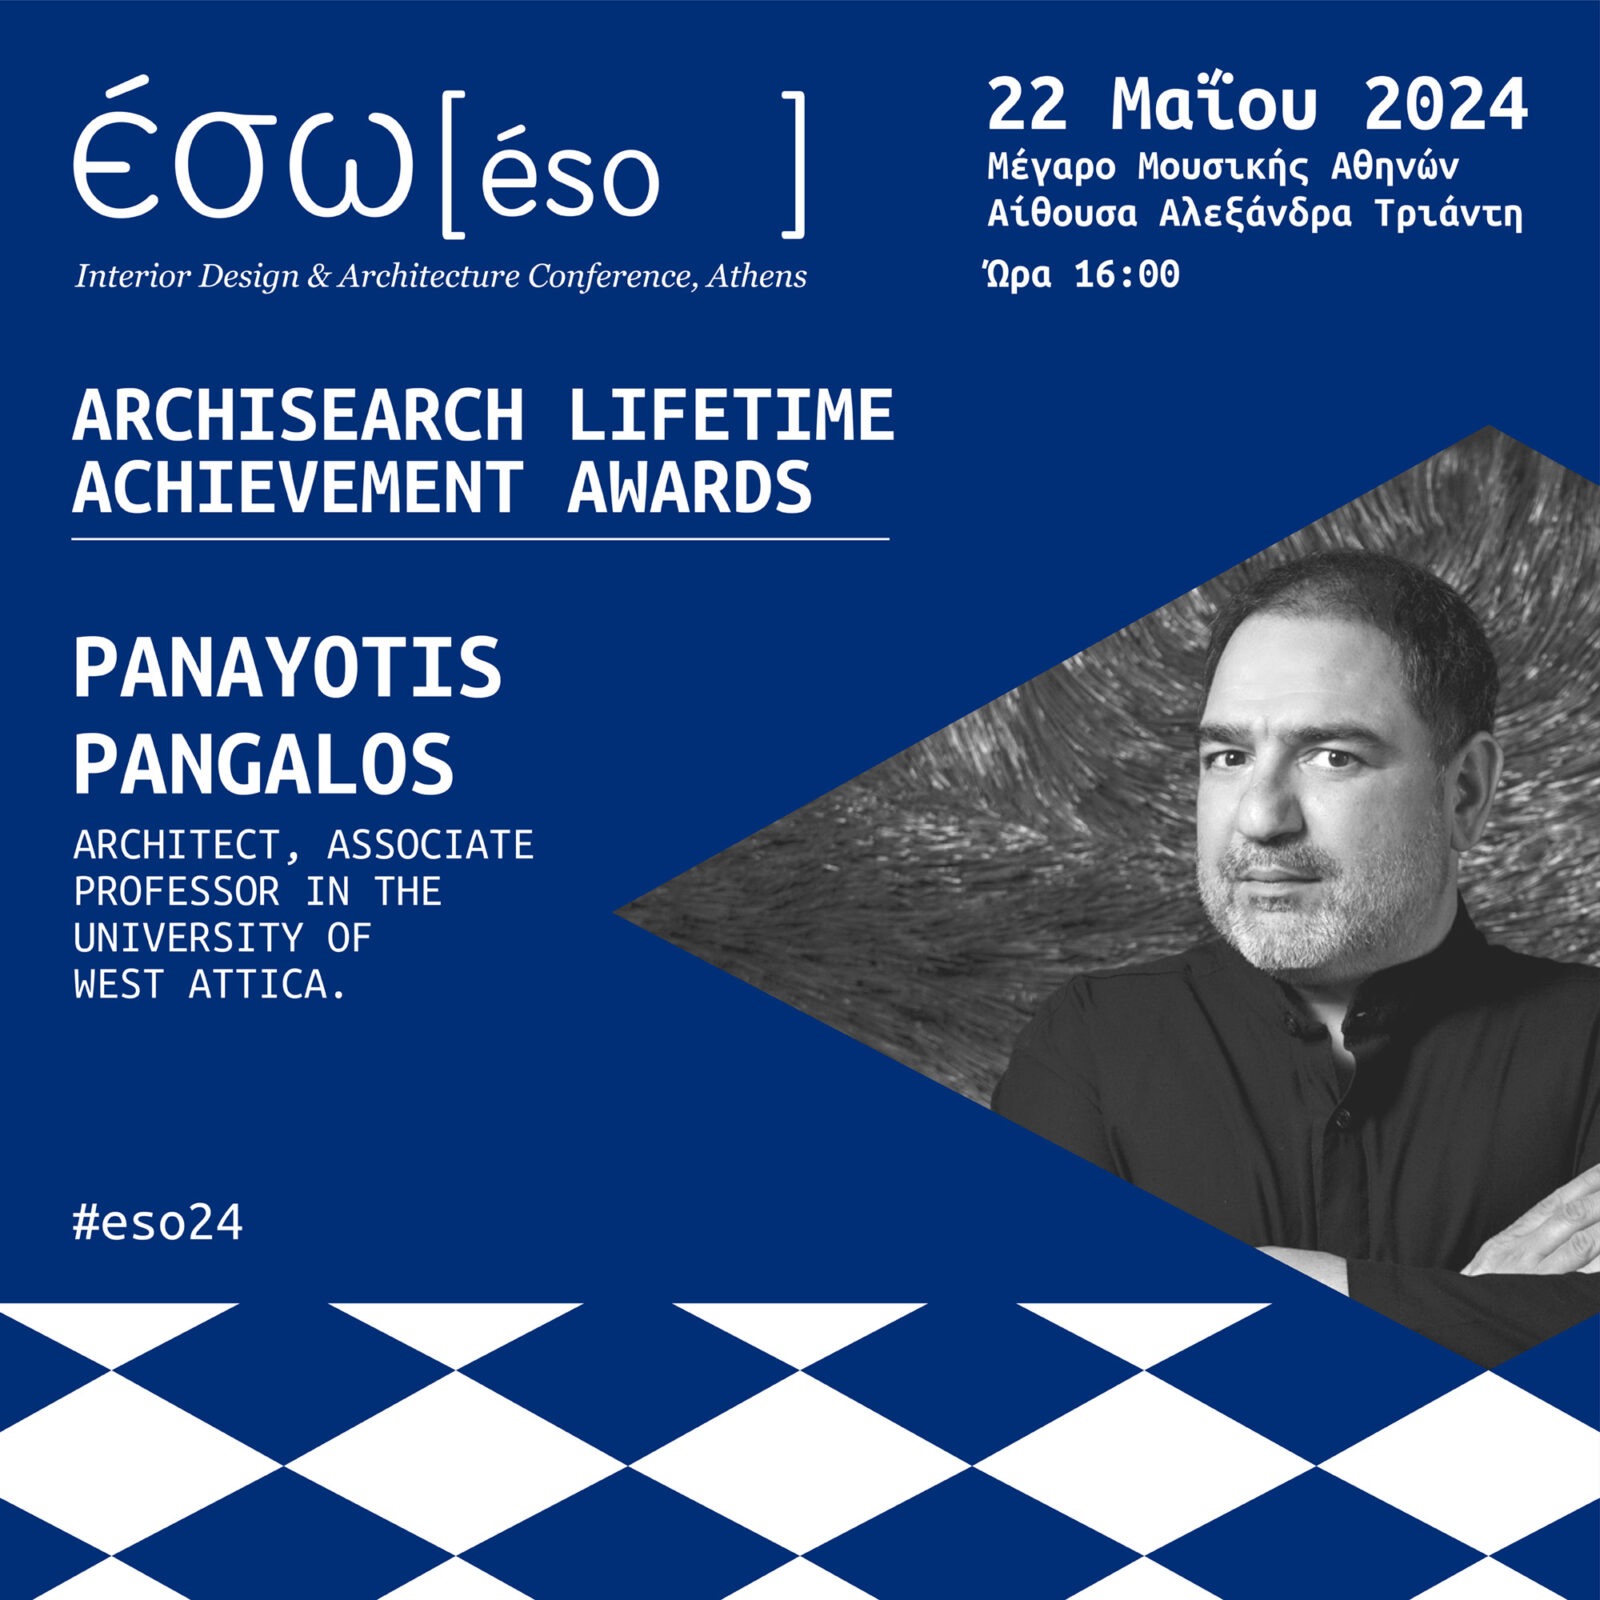 Archisearch ESO 2024 presents “DOWN TO EARTH”: Nature, Materials, Sustainability & AI | SAVE THE DATE MAY 22, 2024